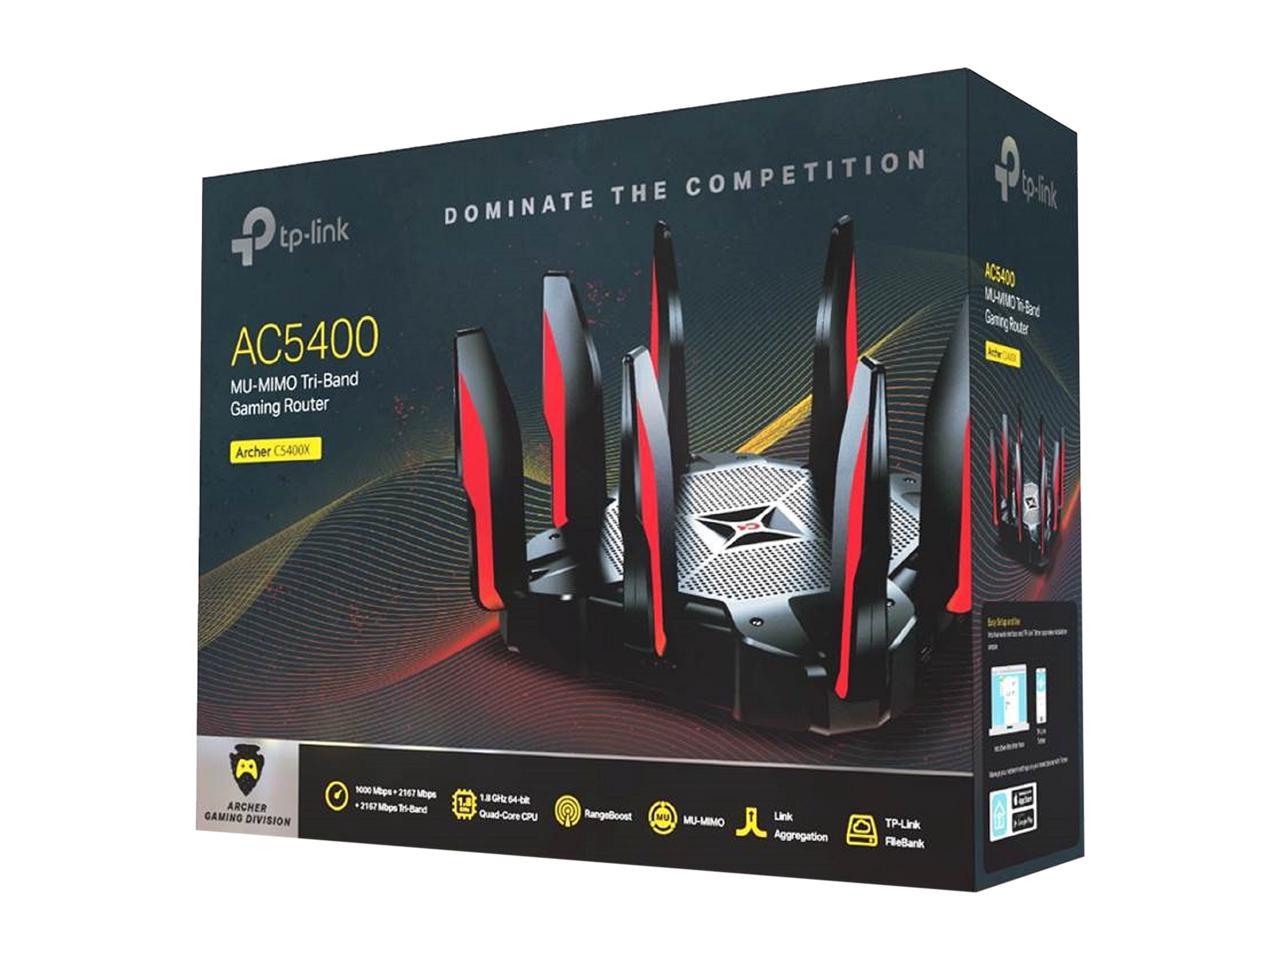 risk fitting funnel TP-Link AC5400 Tri Band WiFi Gaming Router(Archer C5400X) – MU-MIMO Wireless  Router, 1.8GHz Quad-Core 64-bit CPU, Game First Priority, Link Aggregation,  16GB Storage, Airtime Fairness - Newegg.com